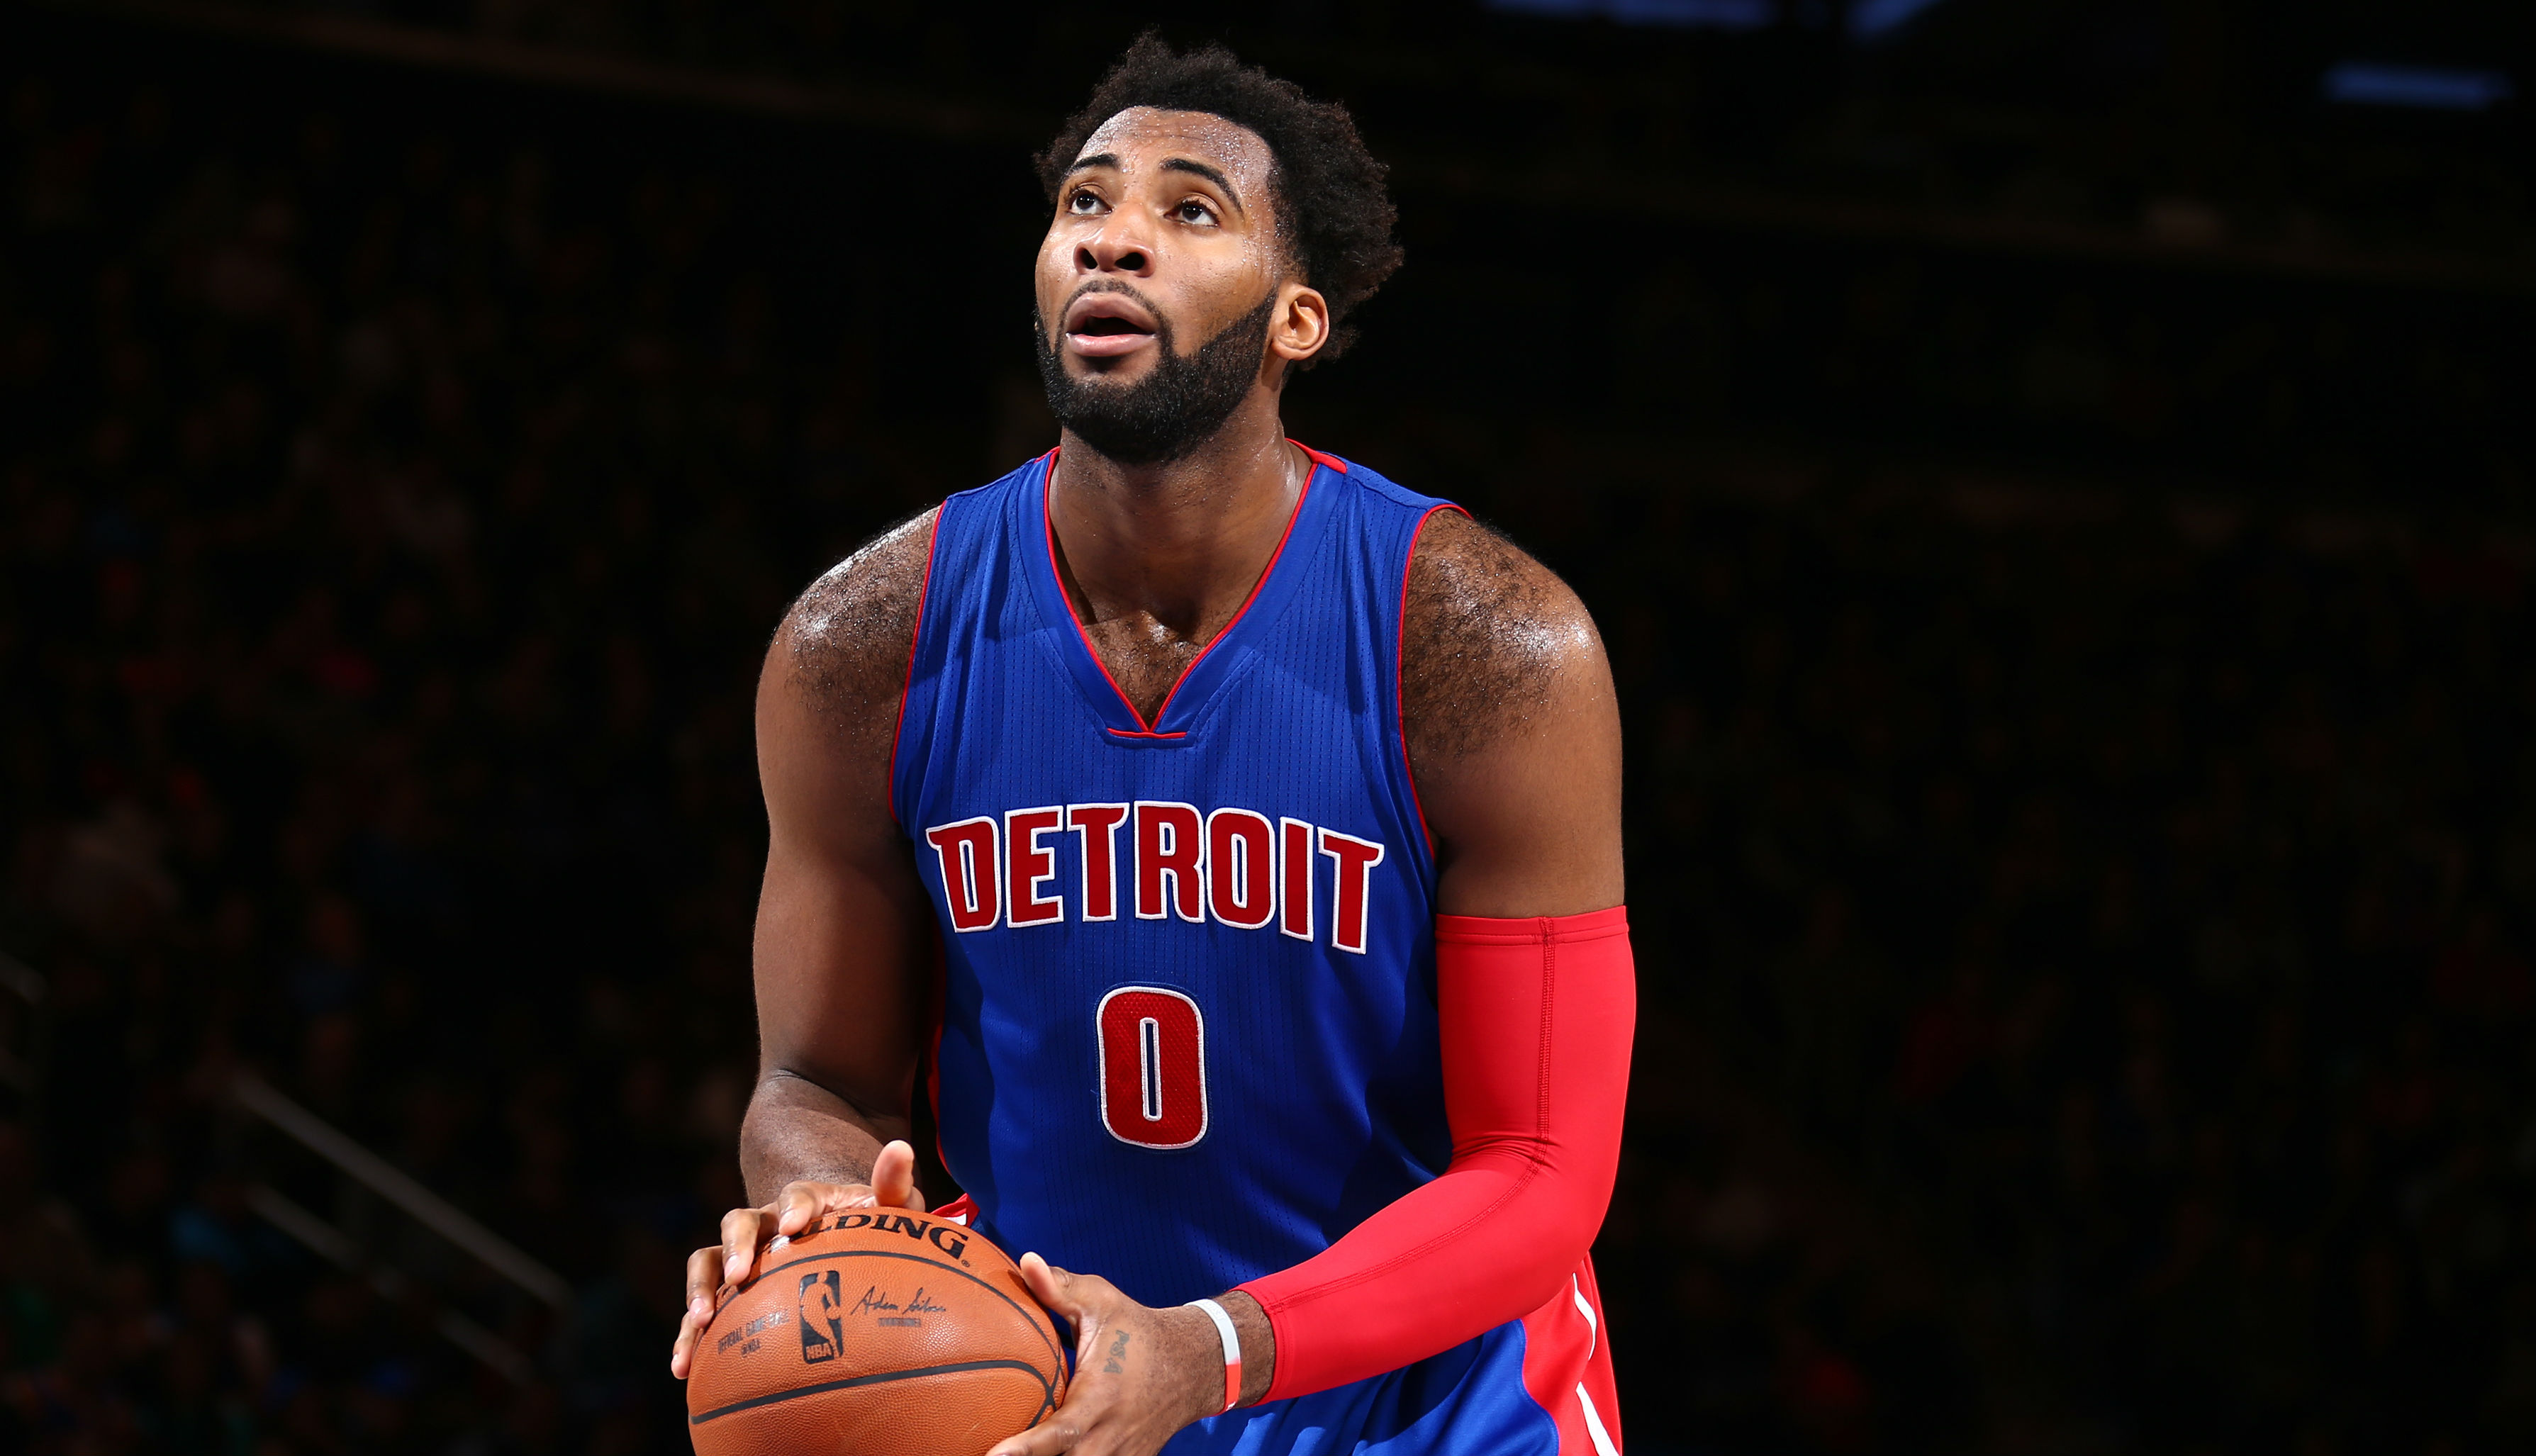 NBA | Andre Drummond sets free-throw miss record as Rockets take 'Hack-A-Shaq' to new ...3577 x 2054